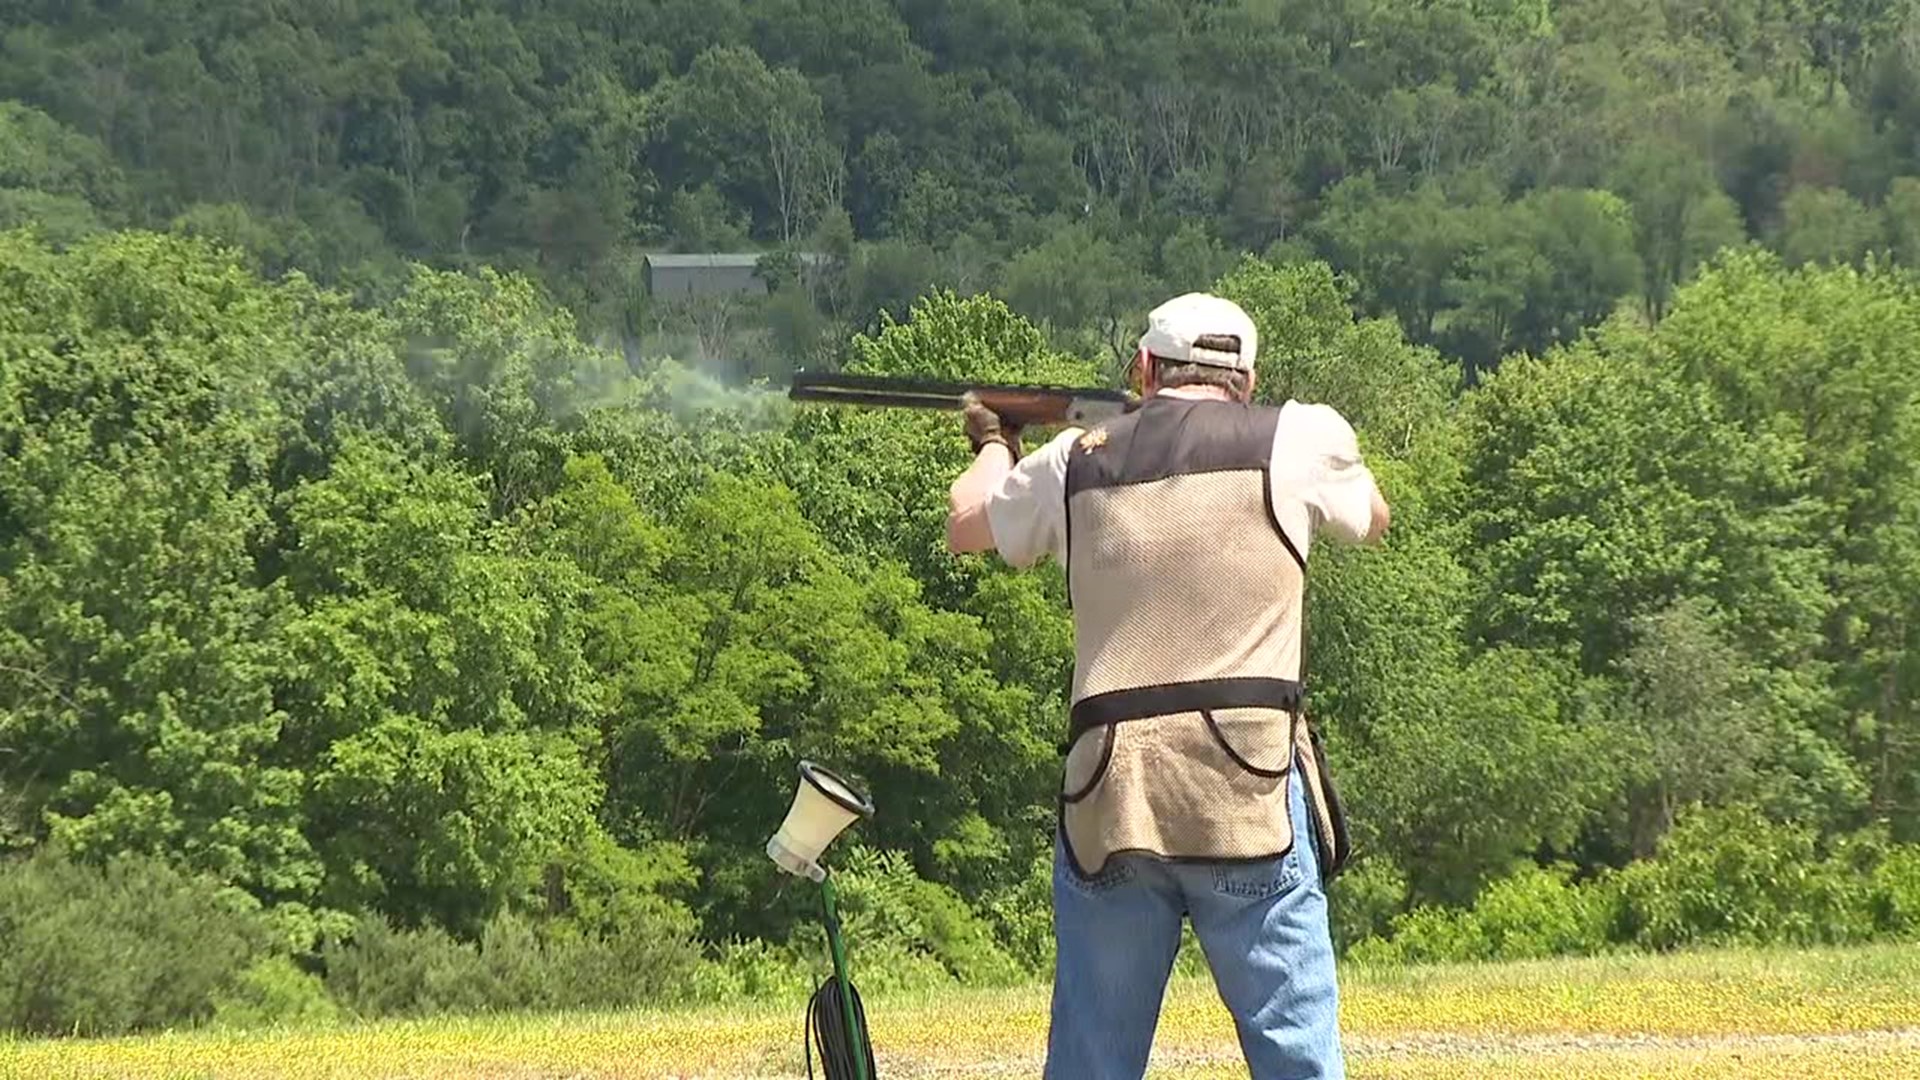 Trap shoot event goes on with precautions